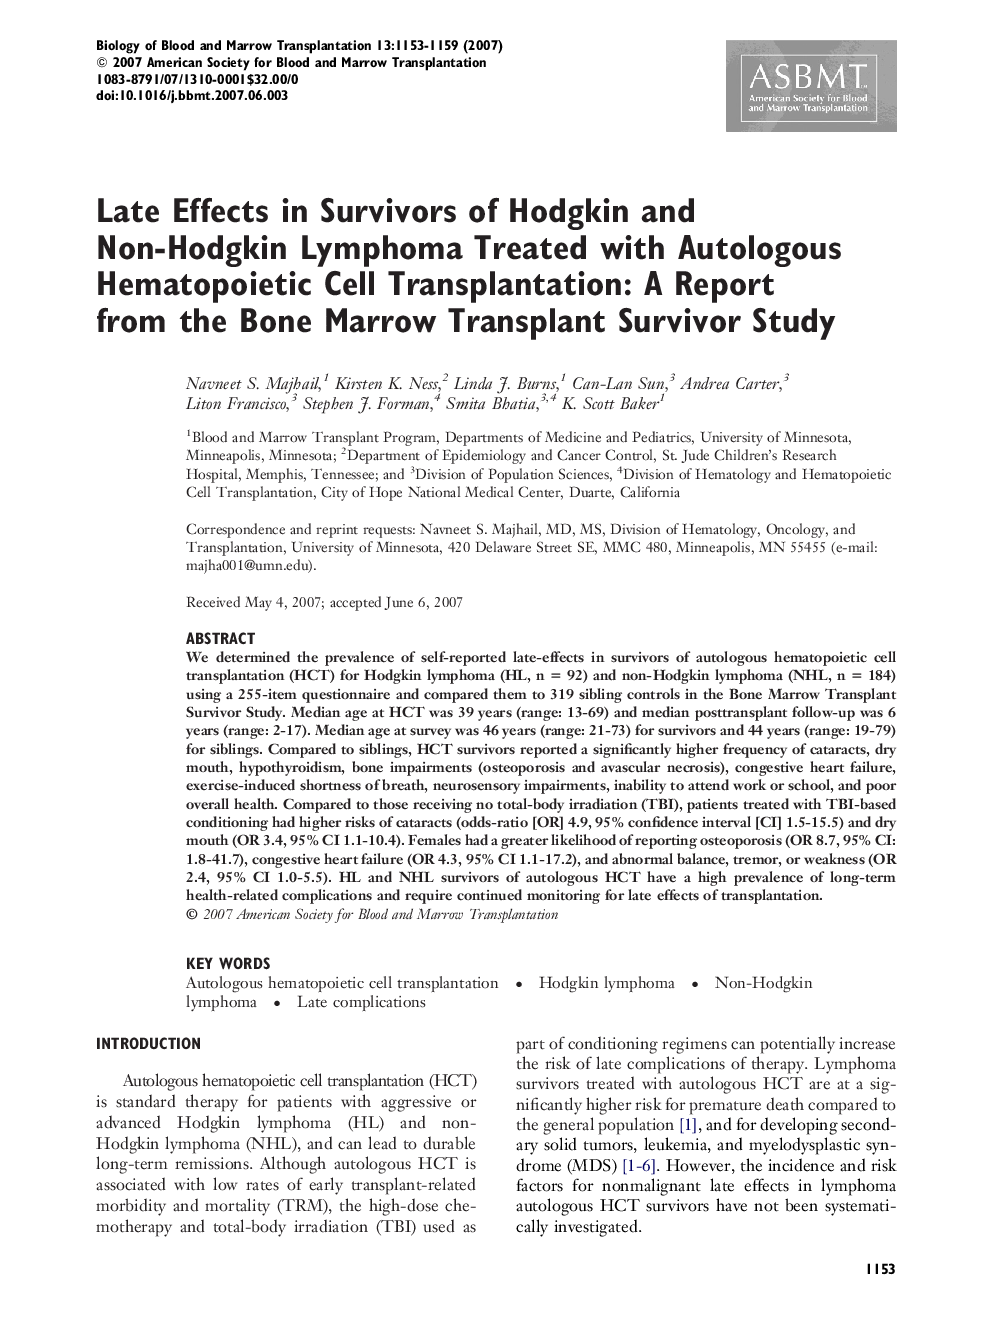 Late Effects in Survivors of Hodgkin and Non-Hodgkin Lymphoma Treated with Autologous Hematopoietic Cell Transplantation: A Report from the Bone Marrow Transplant Survivor Study